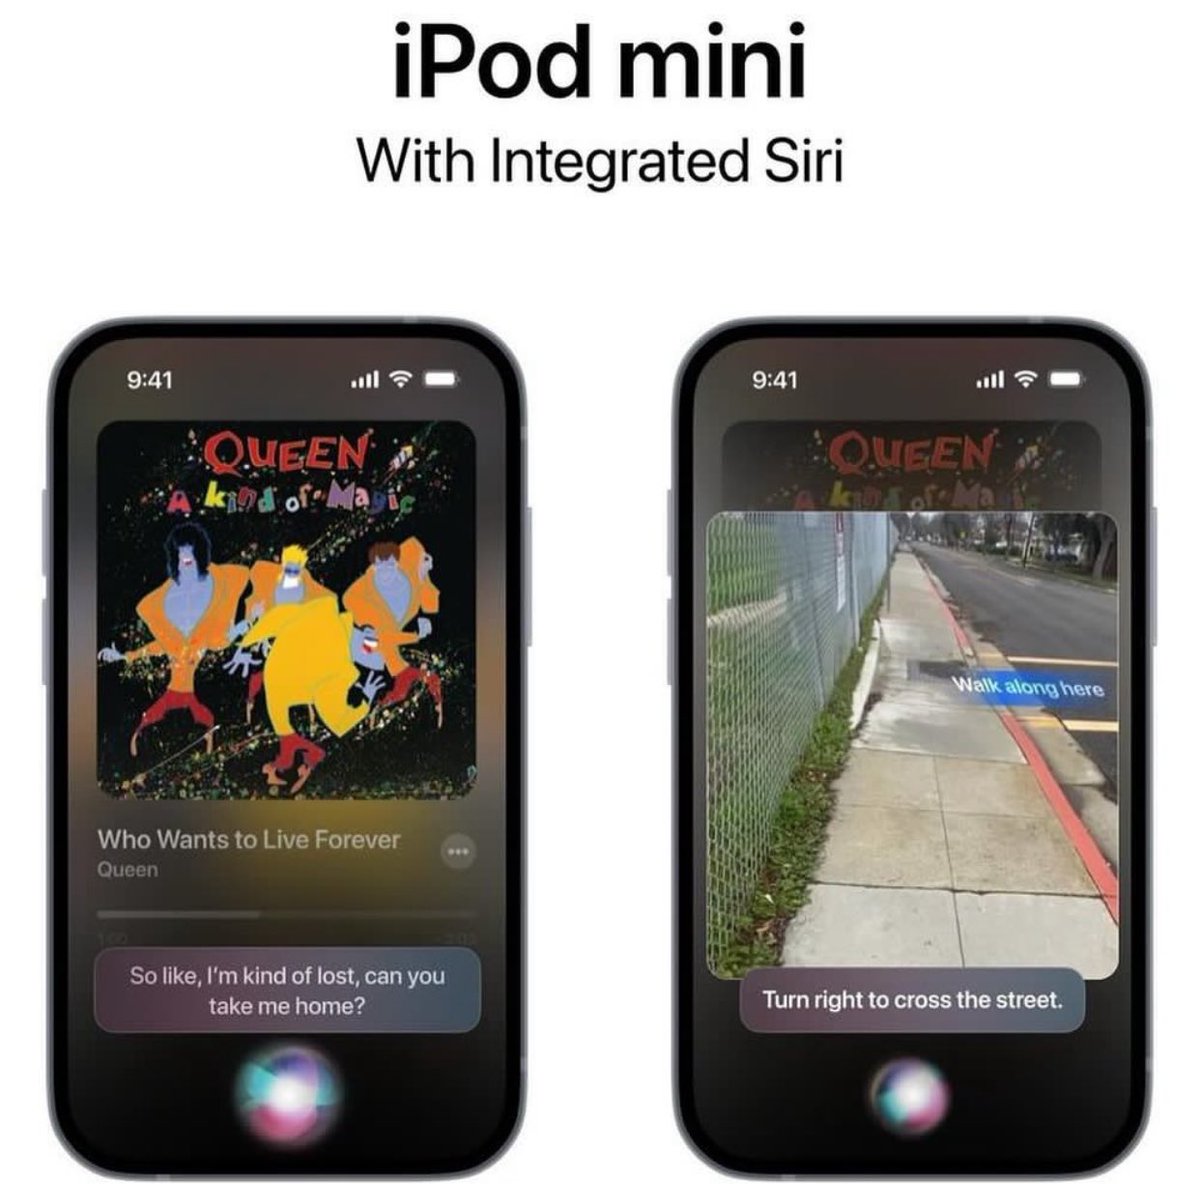 iPod mini With Integrated Siri!! If Apple made this would you buy it? Concept by: @heya_stuff